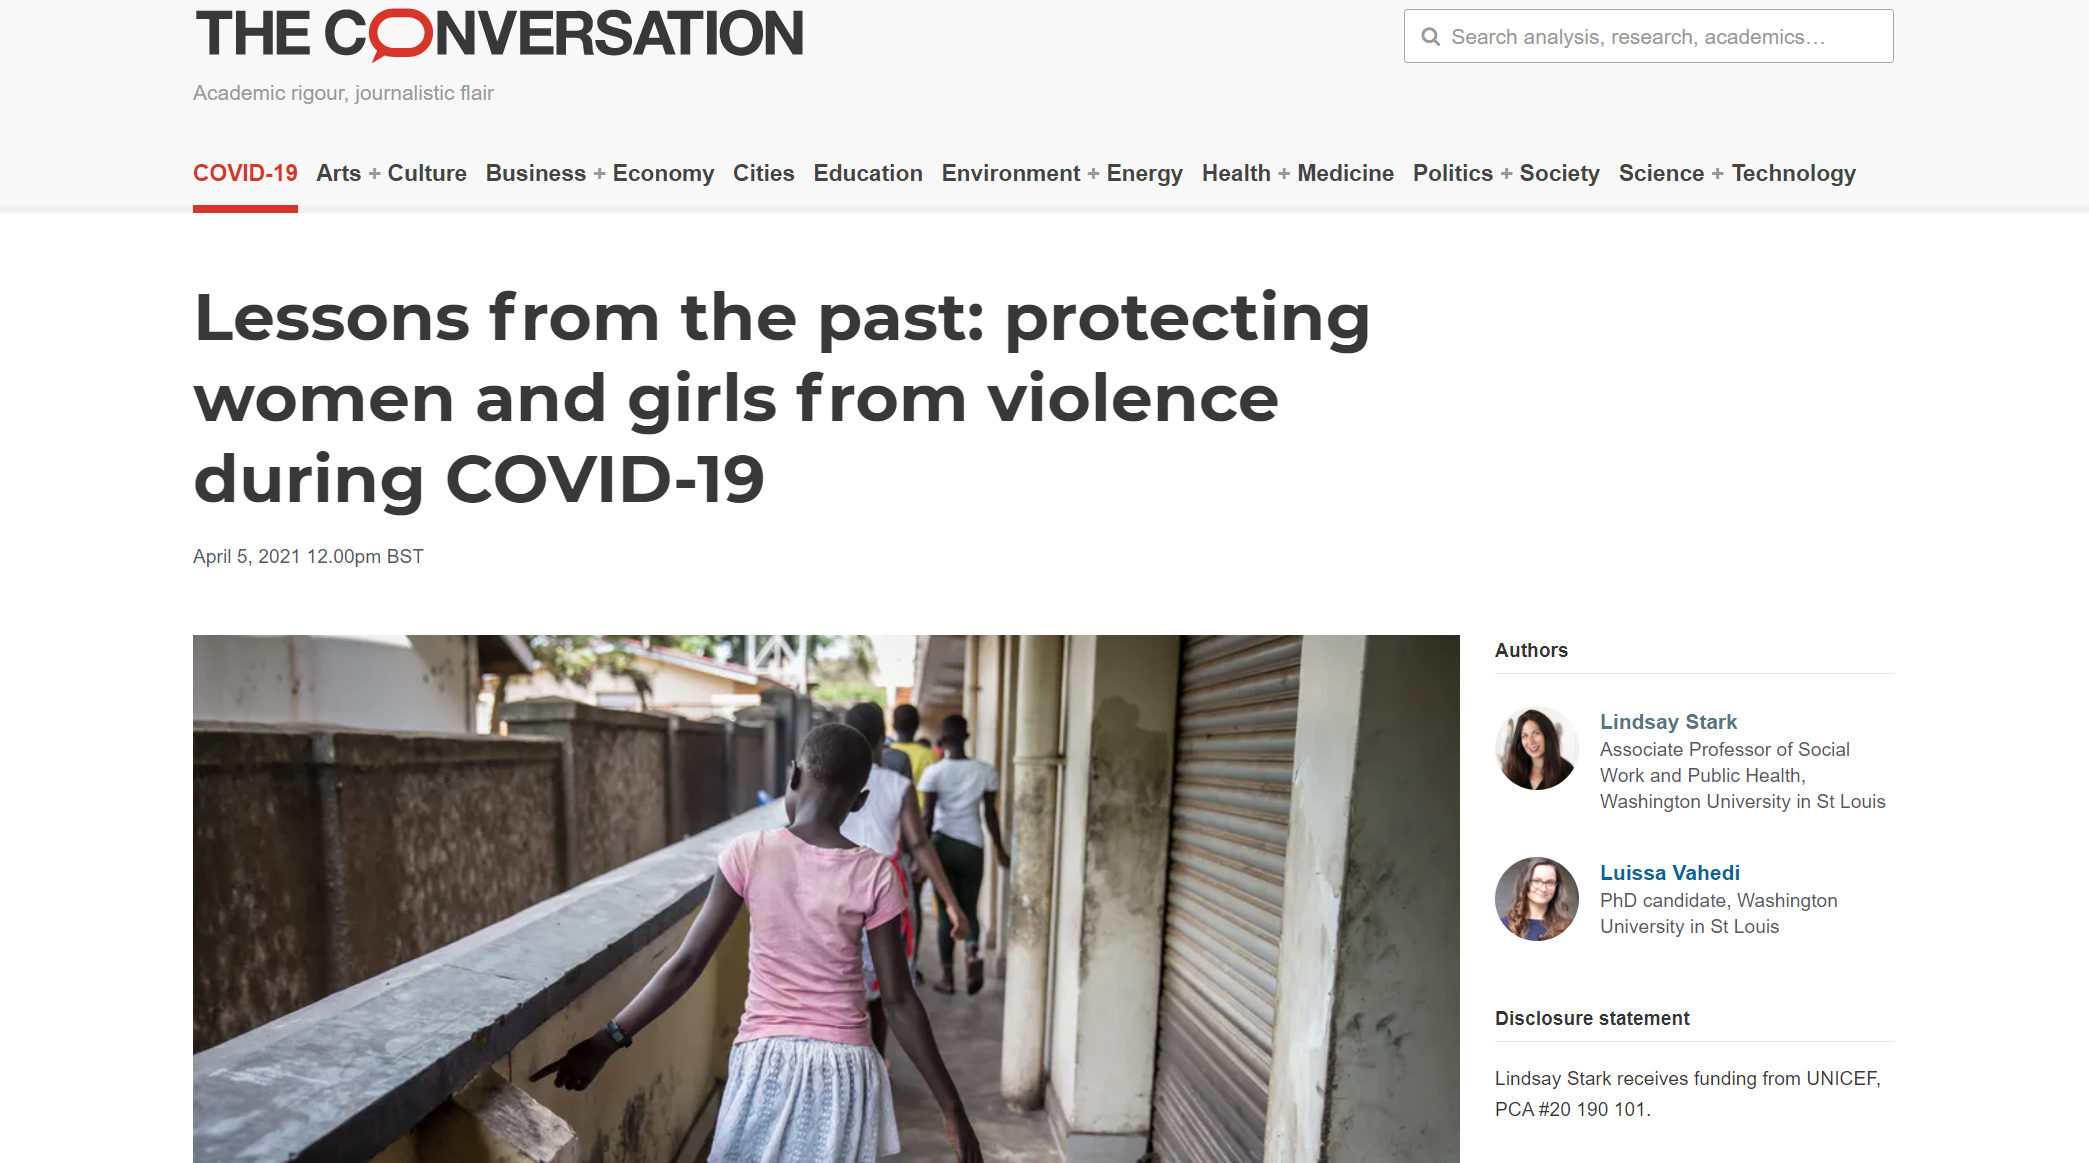 Lessons from the past: protecting women and girls from violence during COVID-19